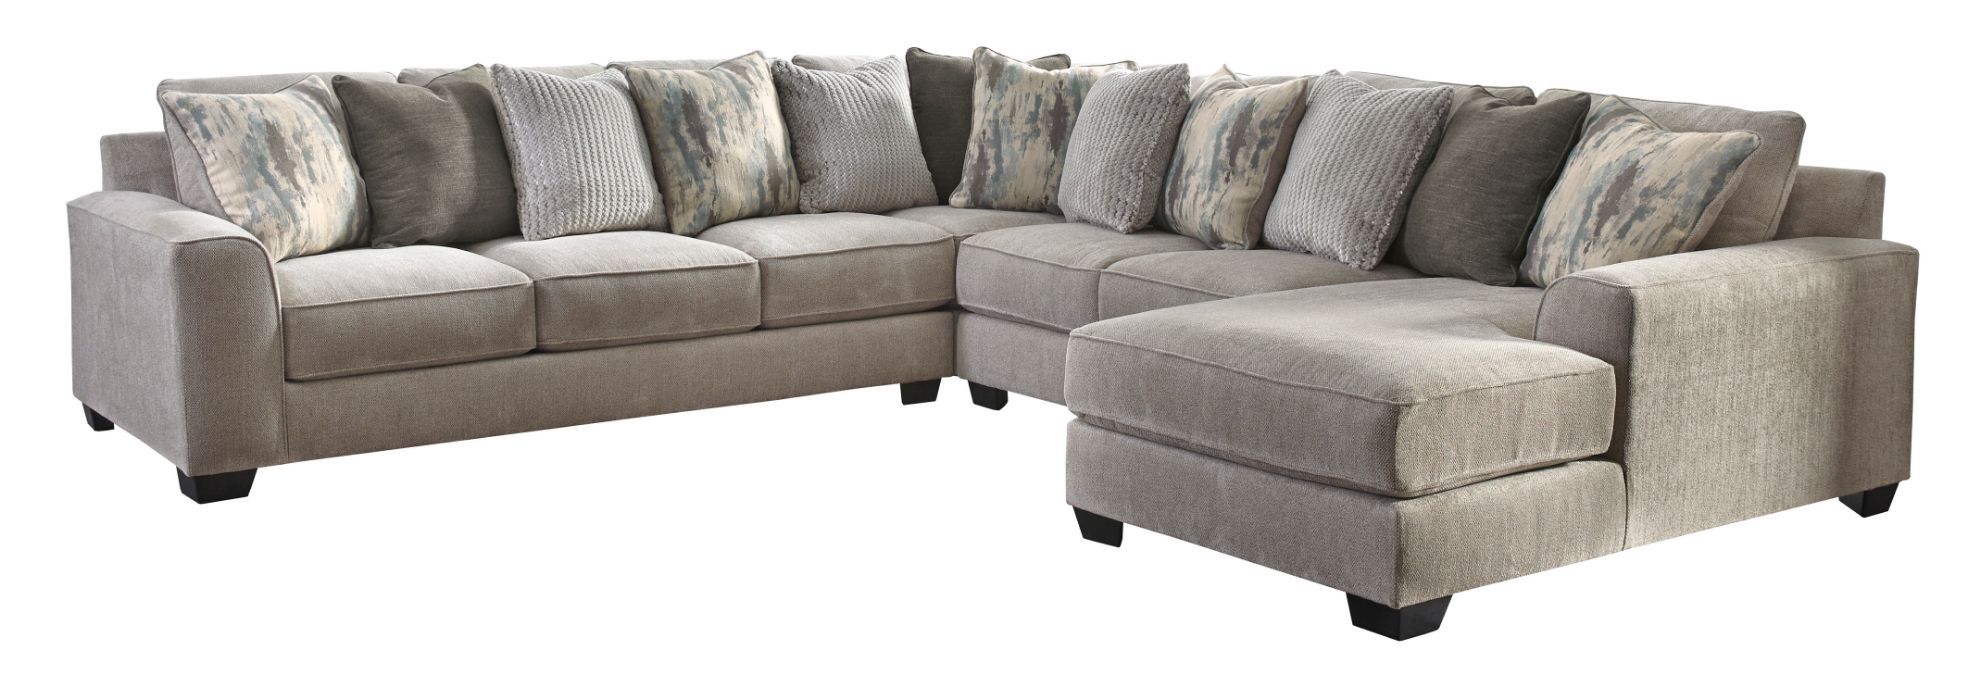 Ardsley 4pc Sectional